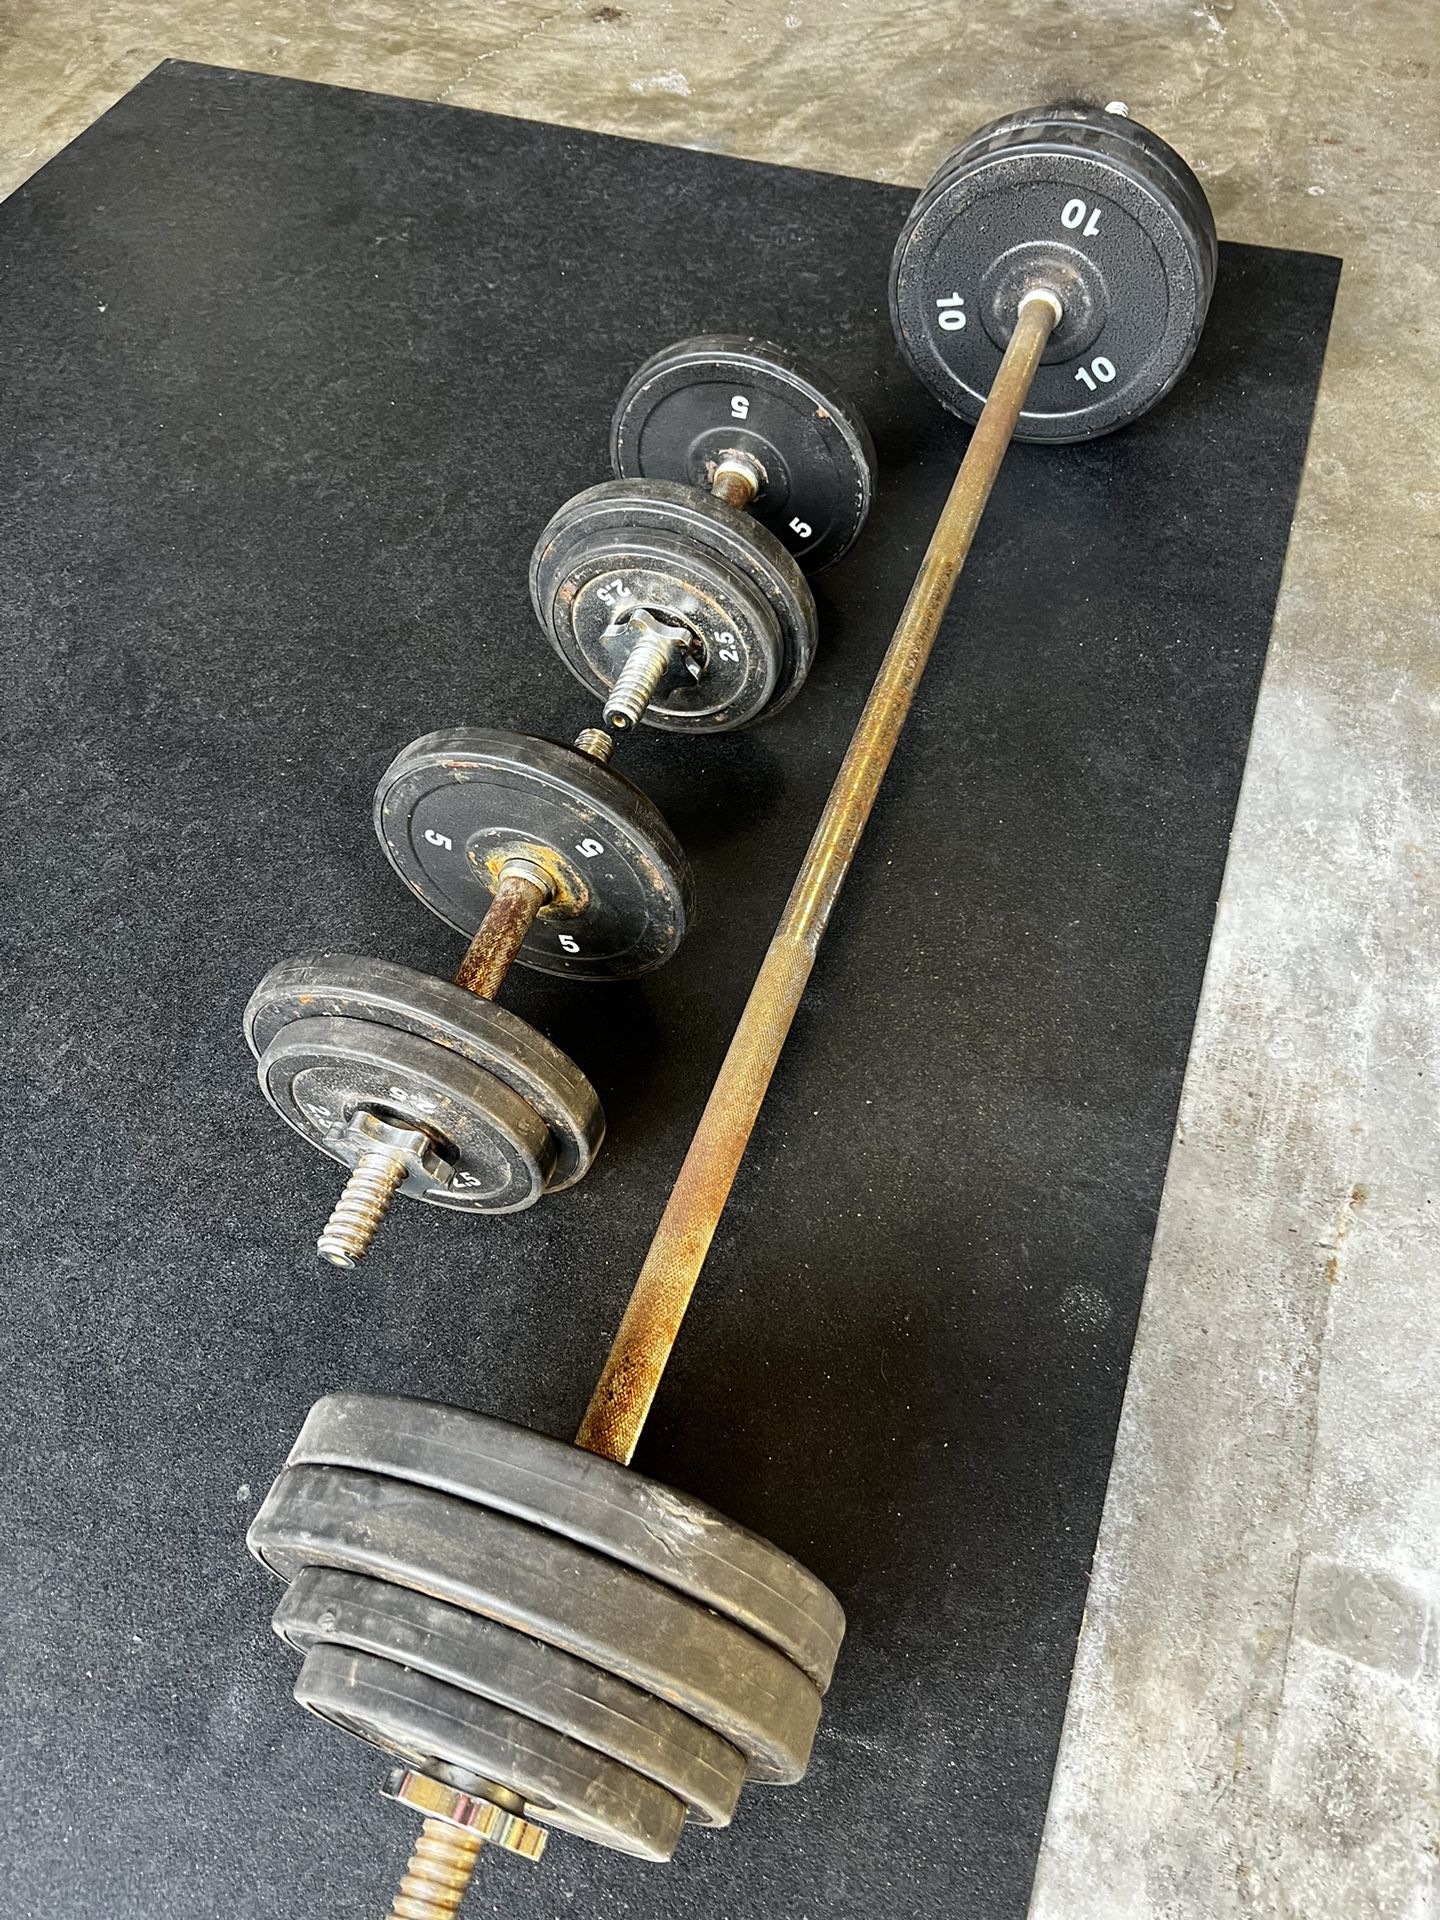 Curl Bar, Dumbbell Bars, Weights